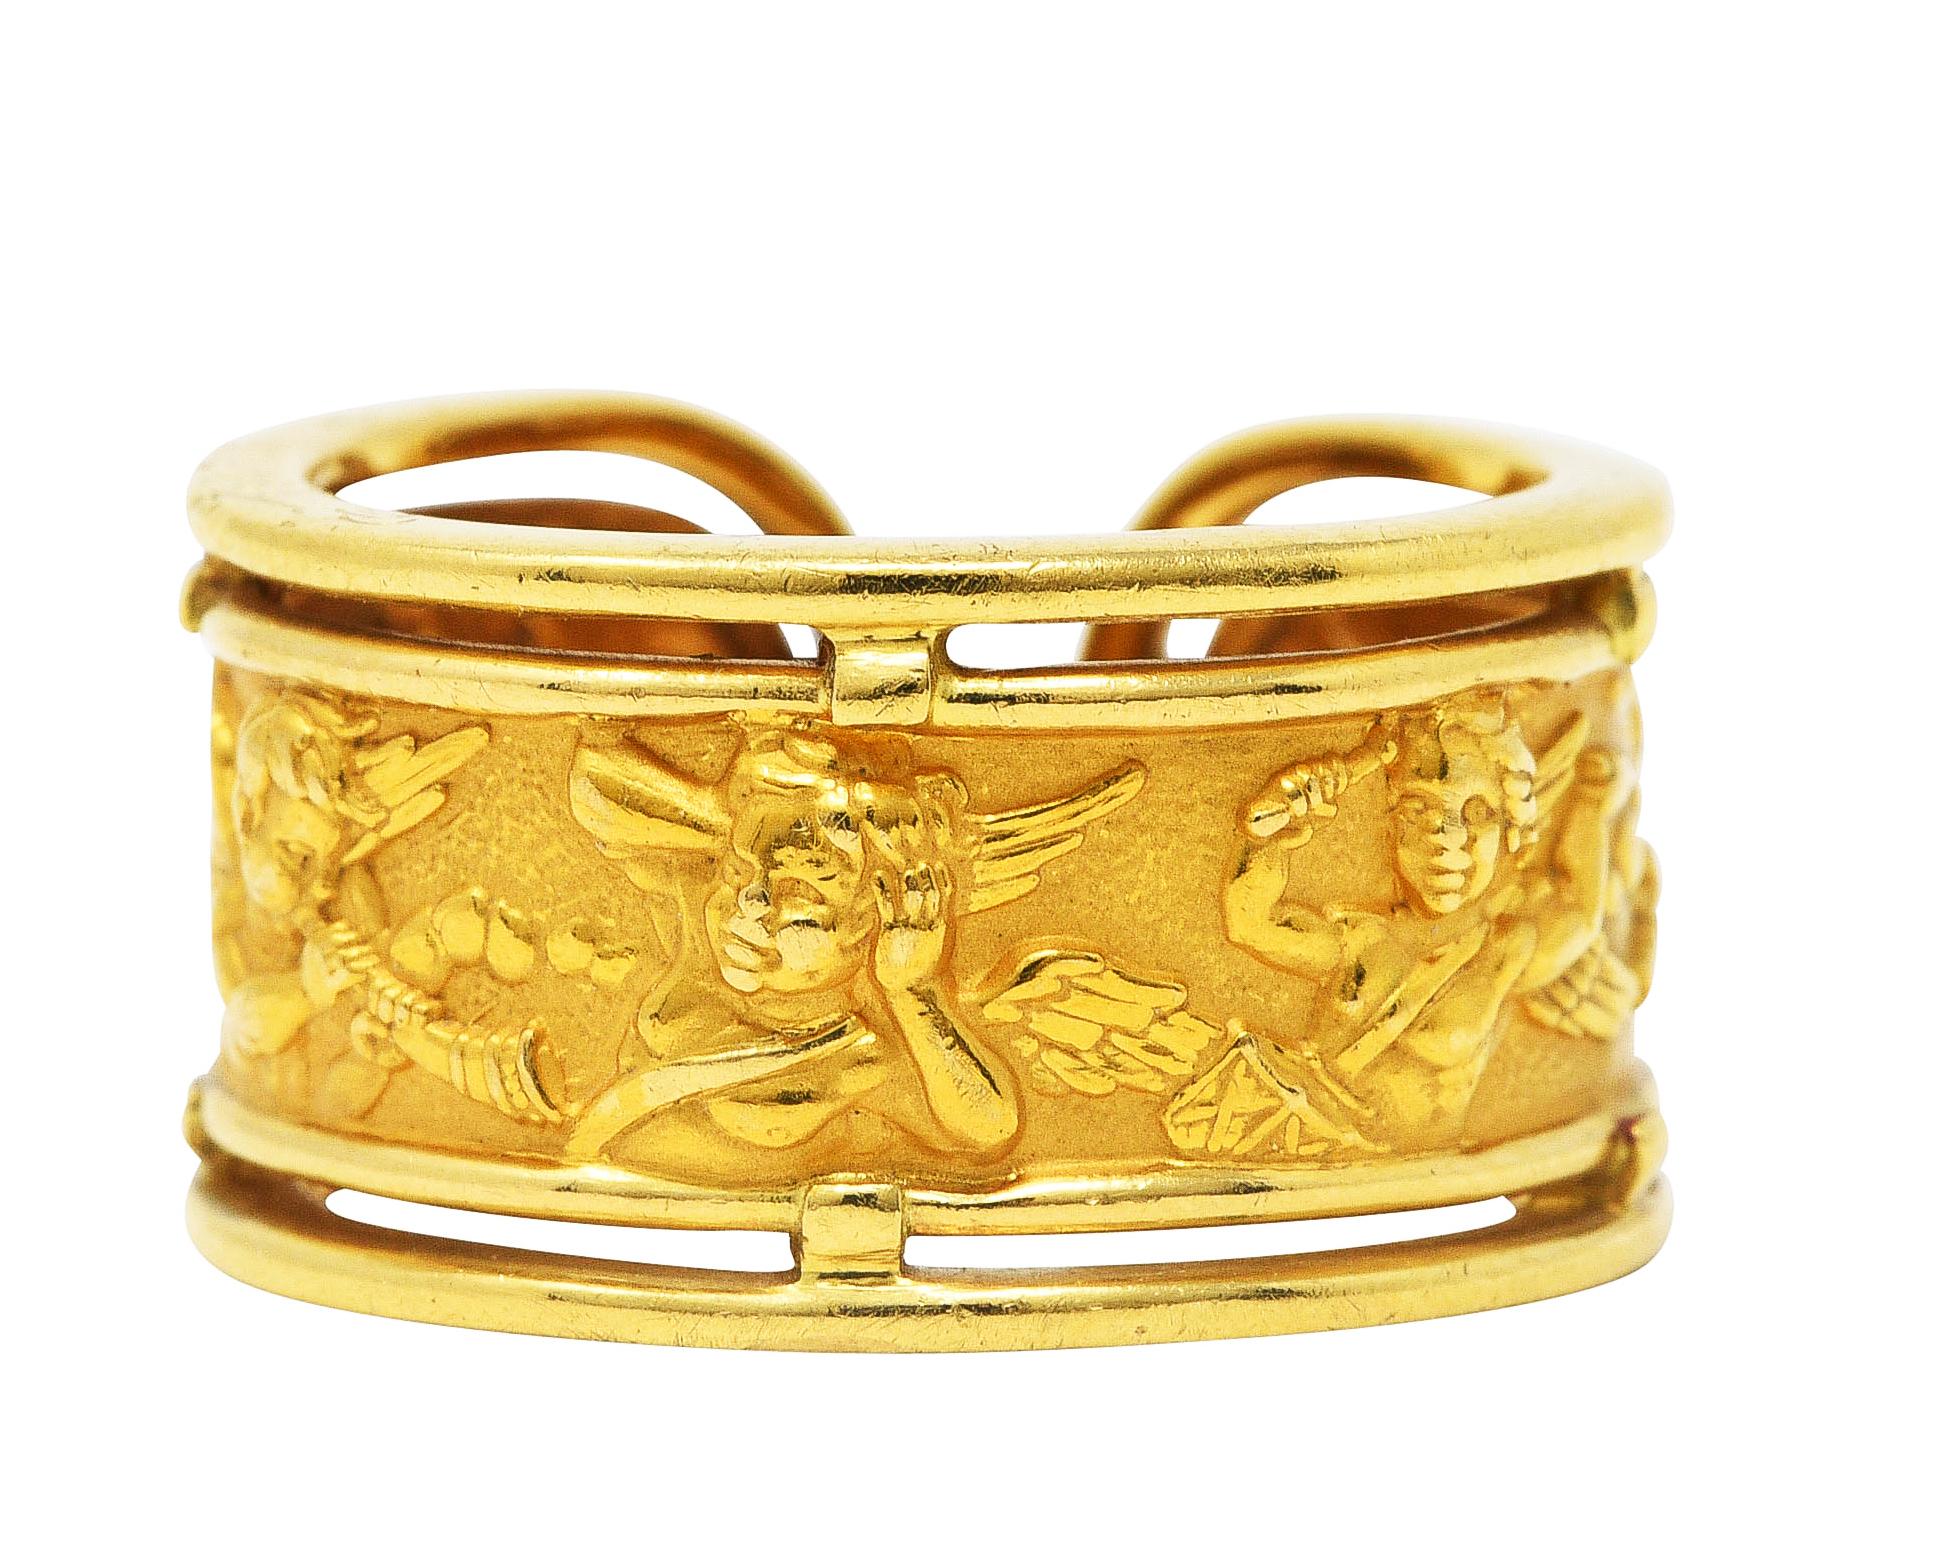 Band ring designed as cuff shape with central panel depicting repoussé cherubs

Cherubs are depicted joyously playing various instruments

With gold frame surround

Stamped 750 for 18 karat gold

With maker's mark for Carrera y Carrera

From the